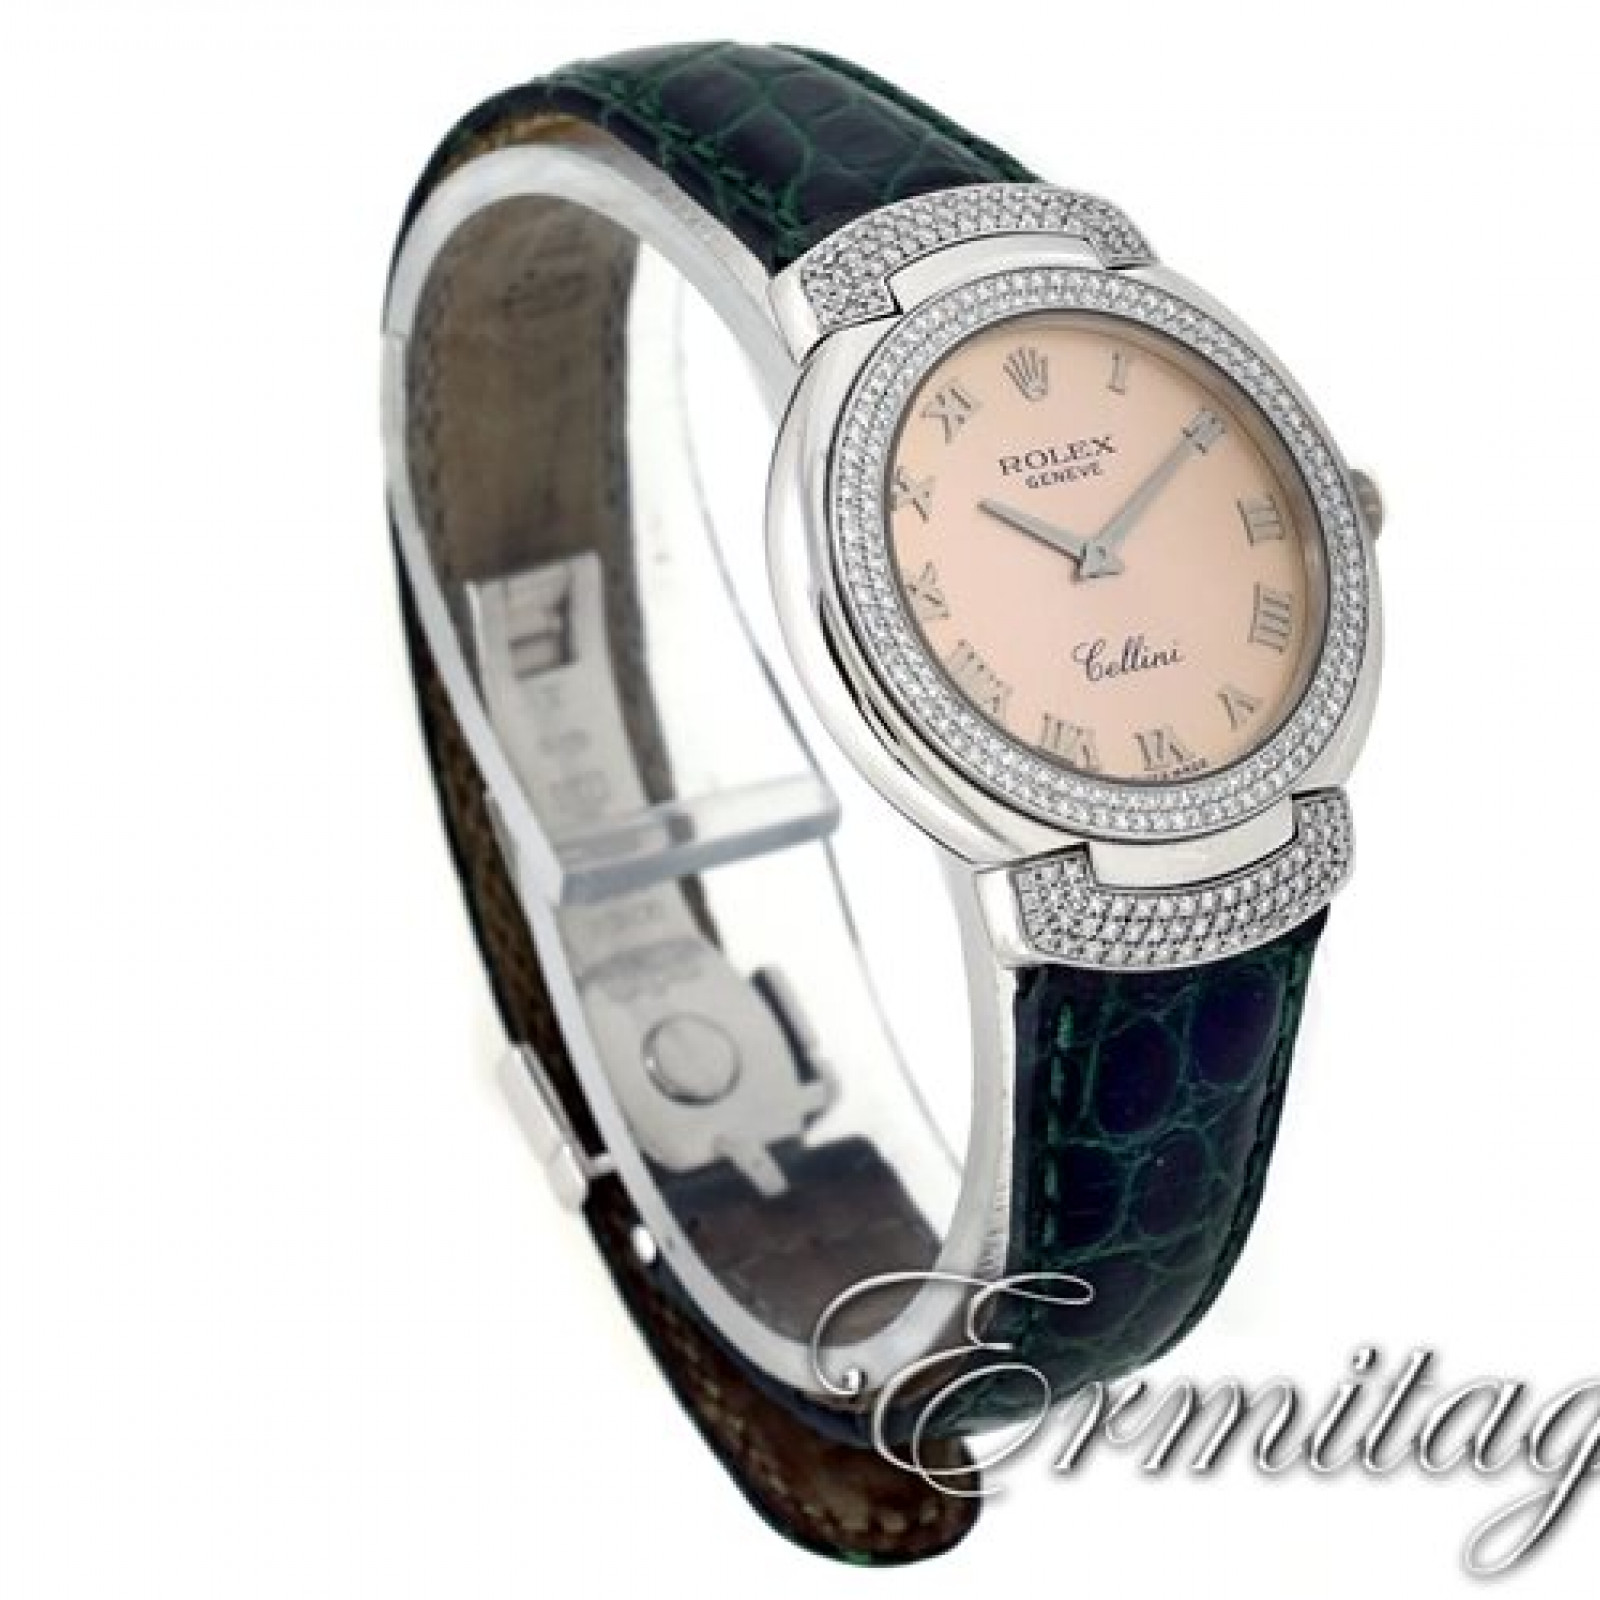 Rolex Cellini Cellissima 6683 Gold with Pink Dial